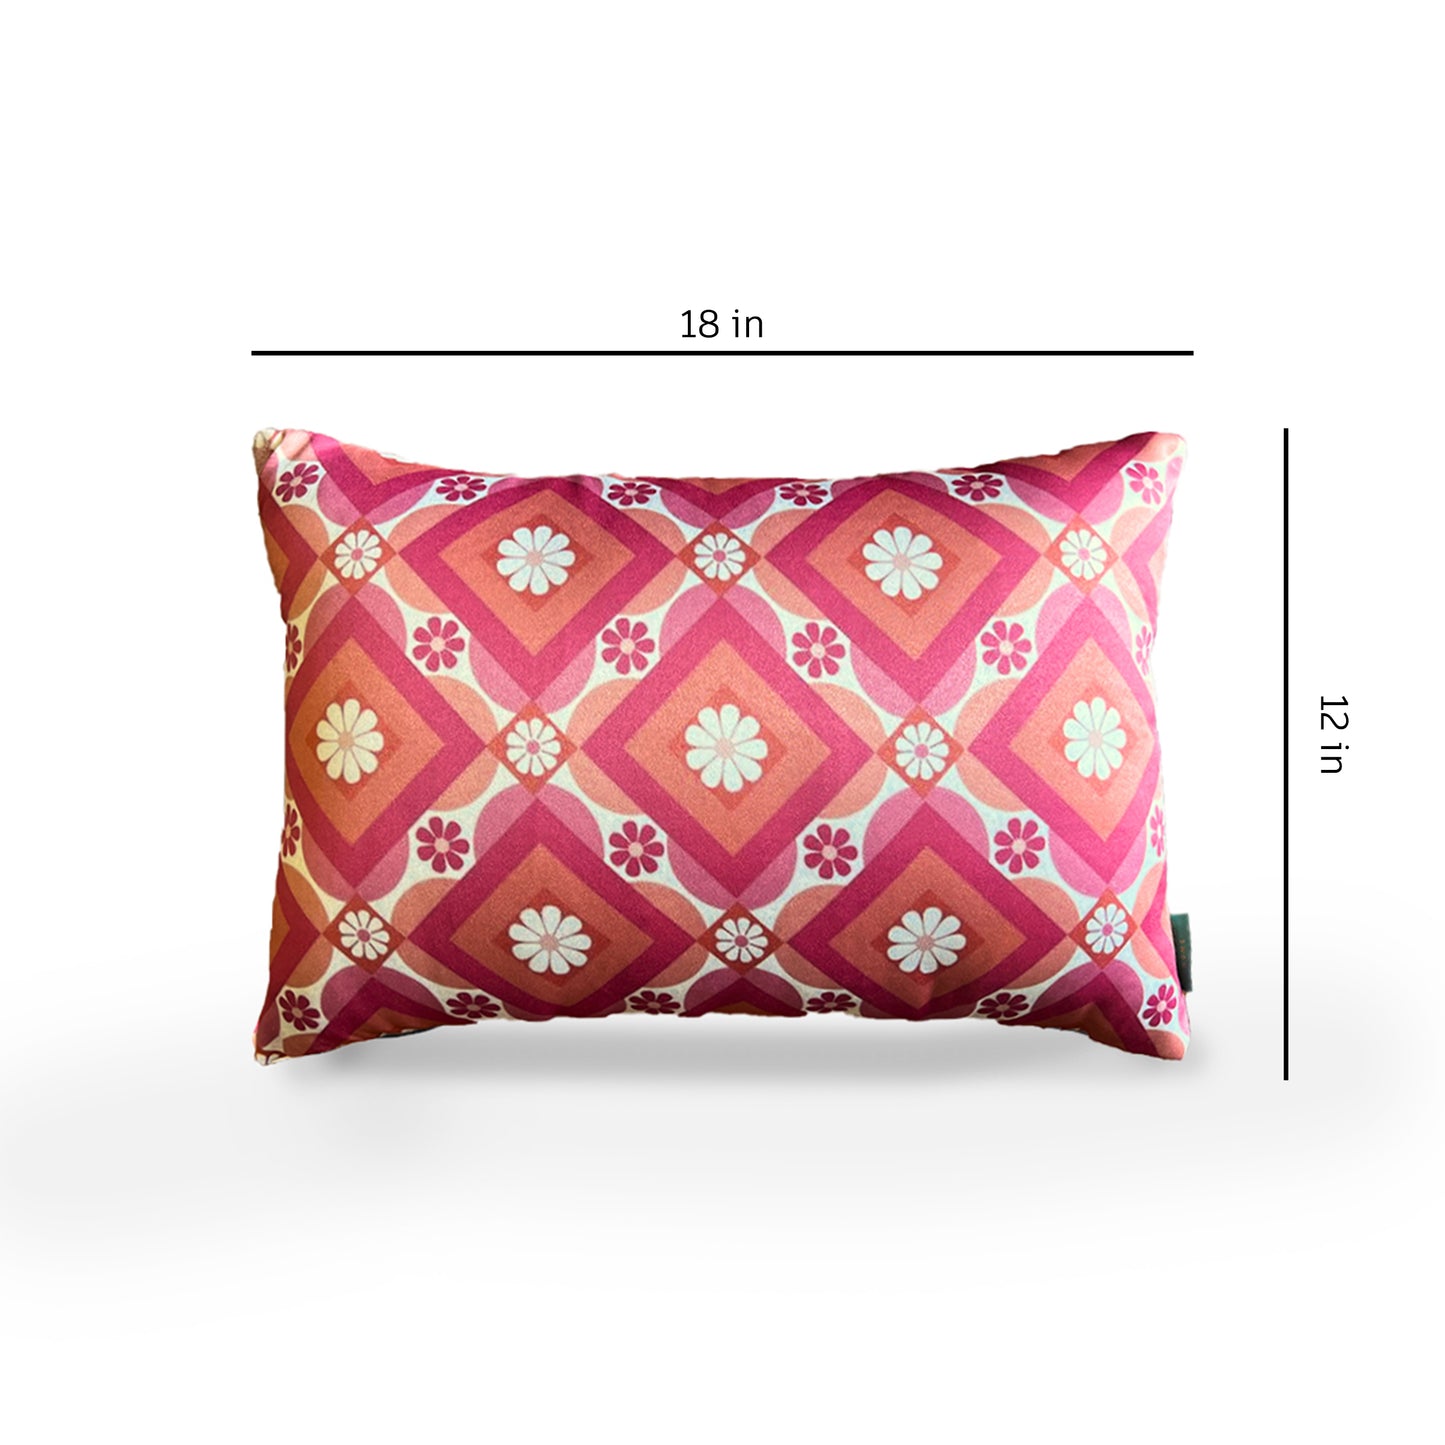 PITTER PATTER Set of 5 Cushion Covers